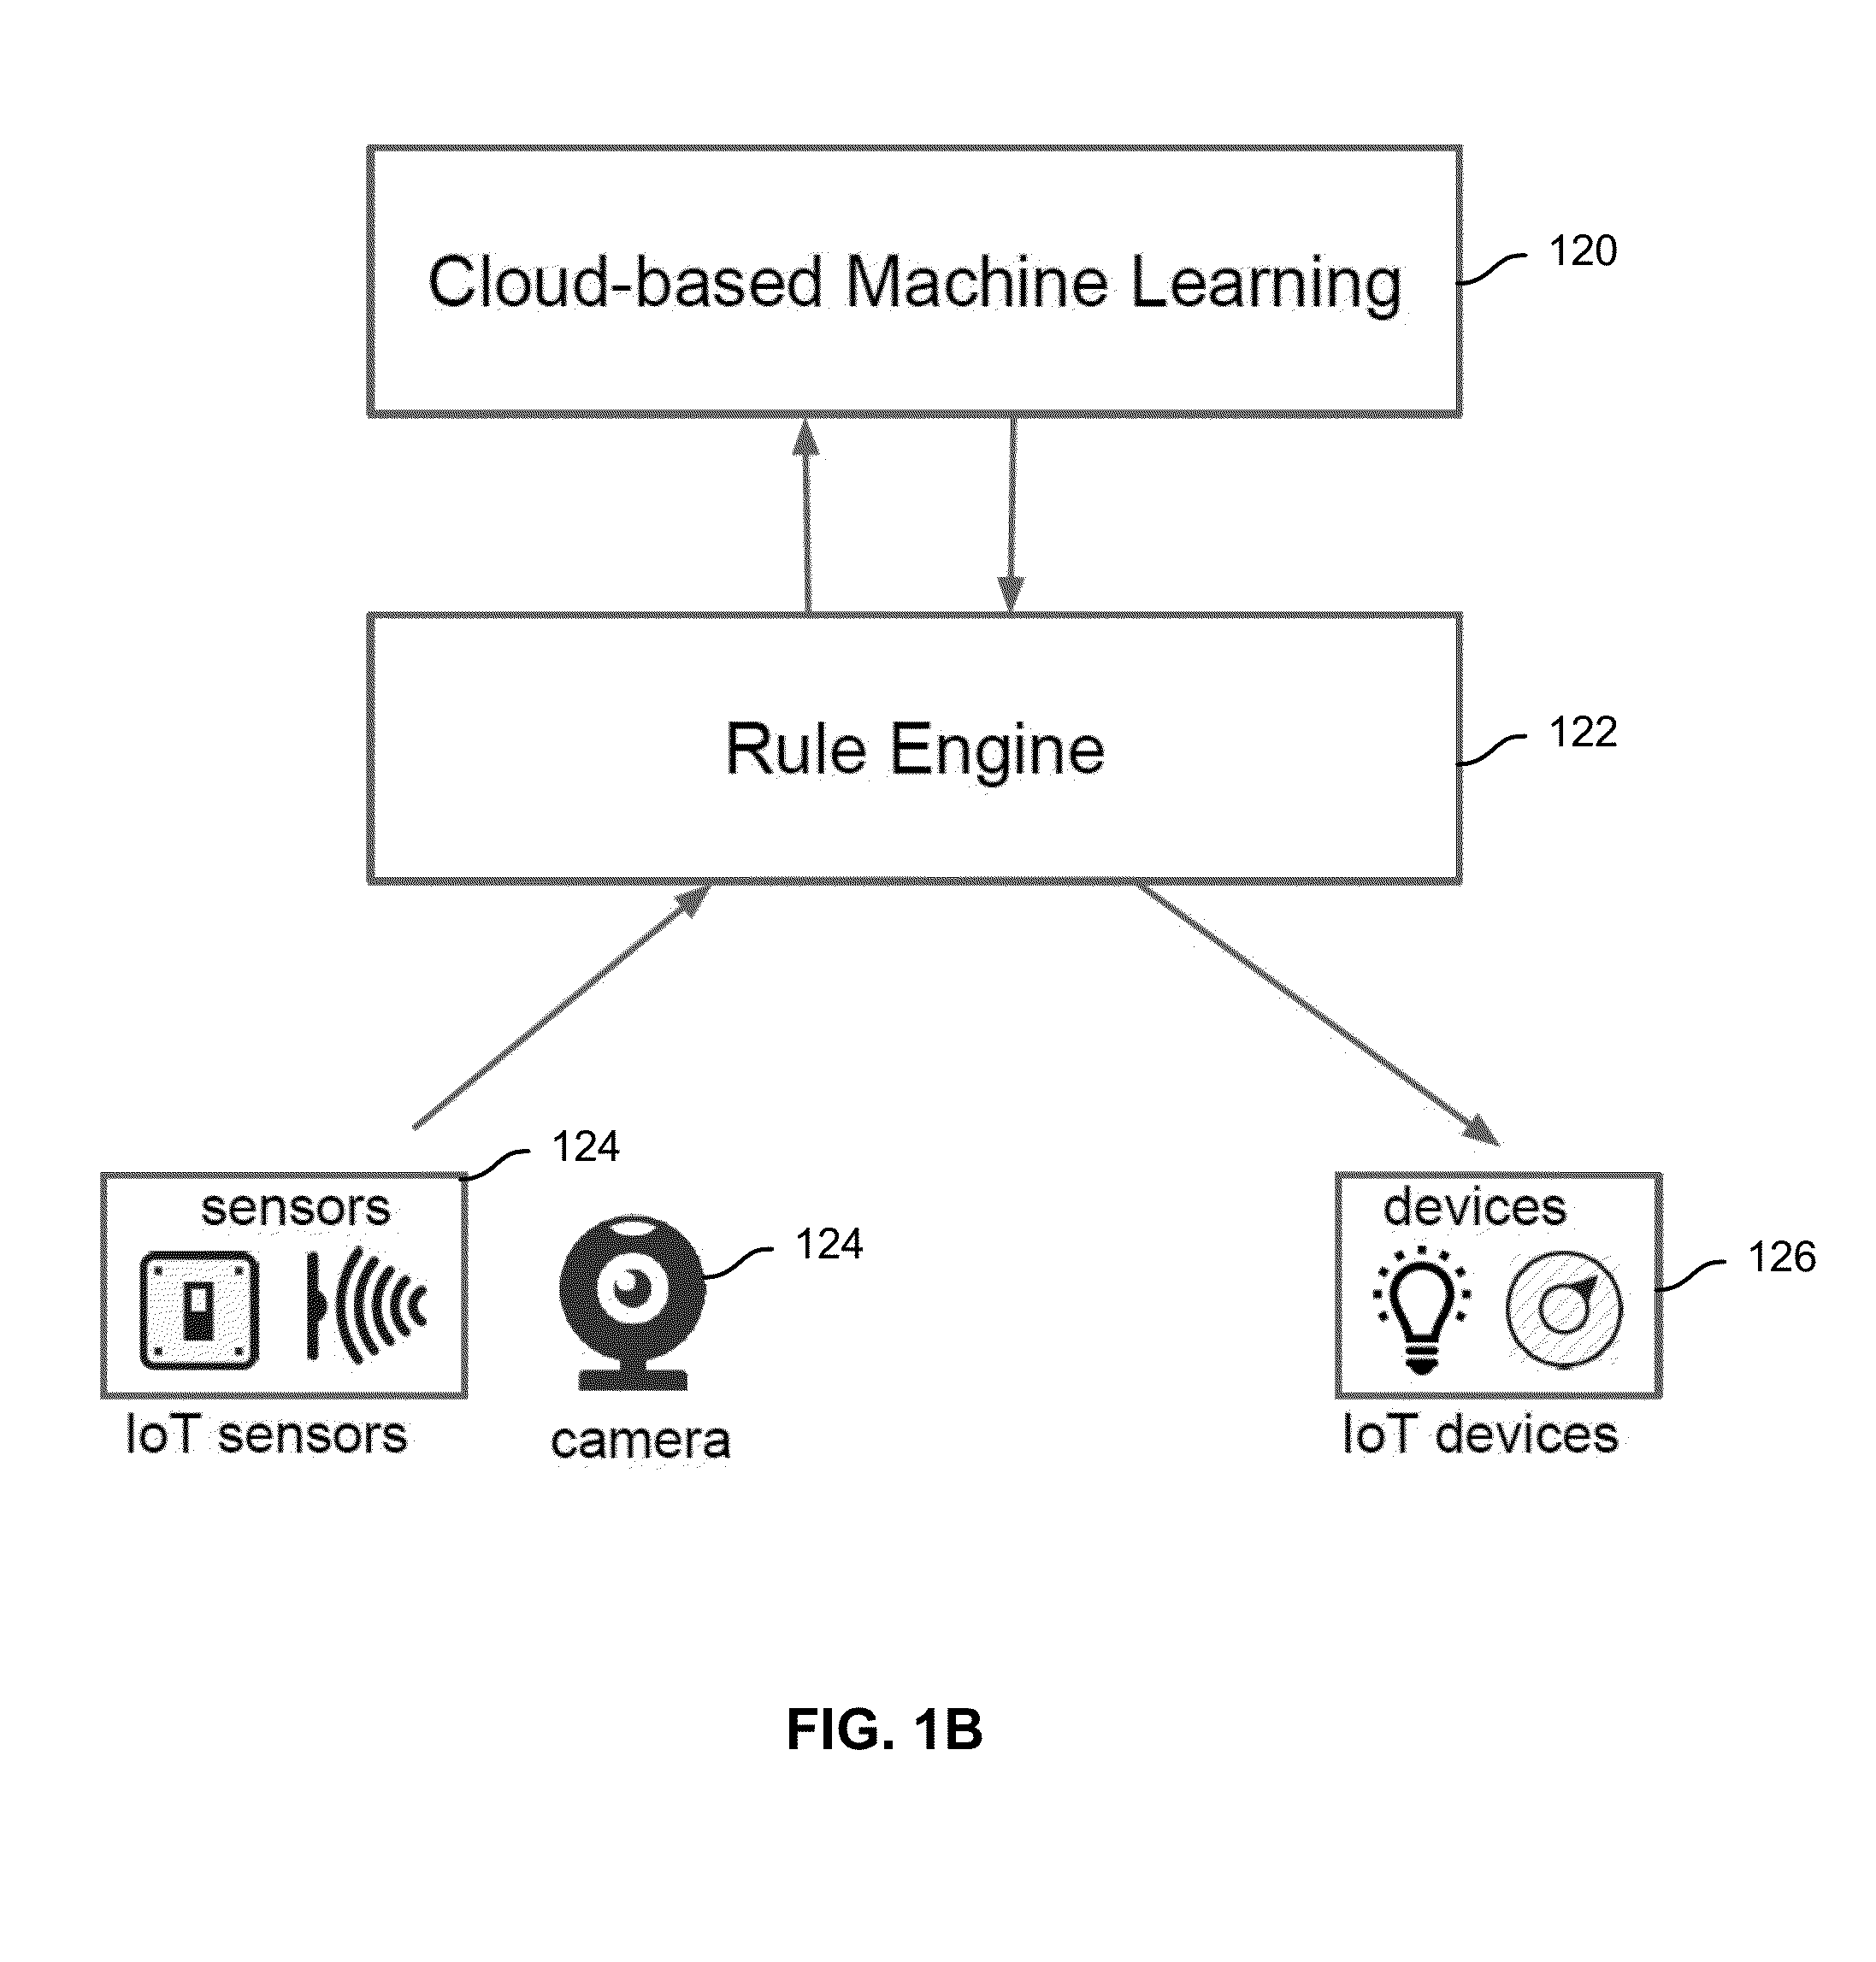 Automatically learning and controlling connected devices